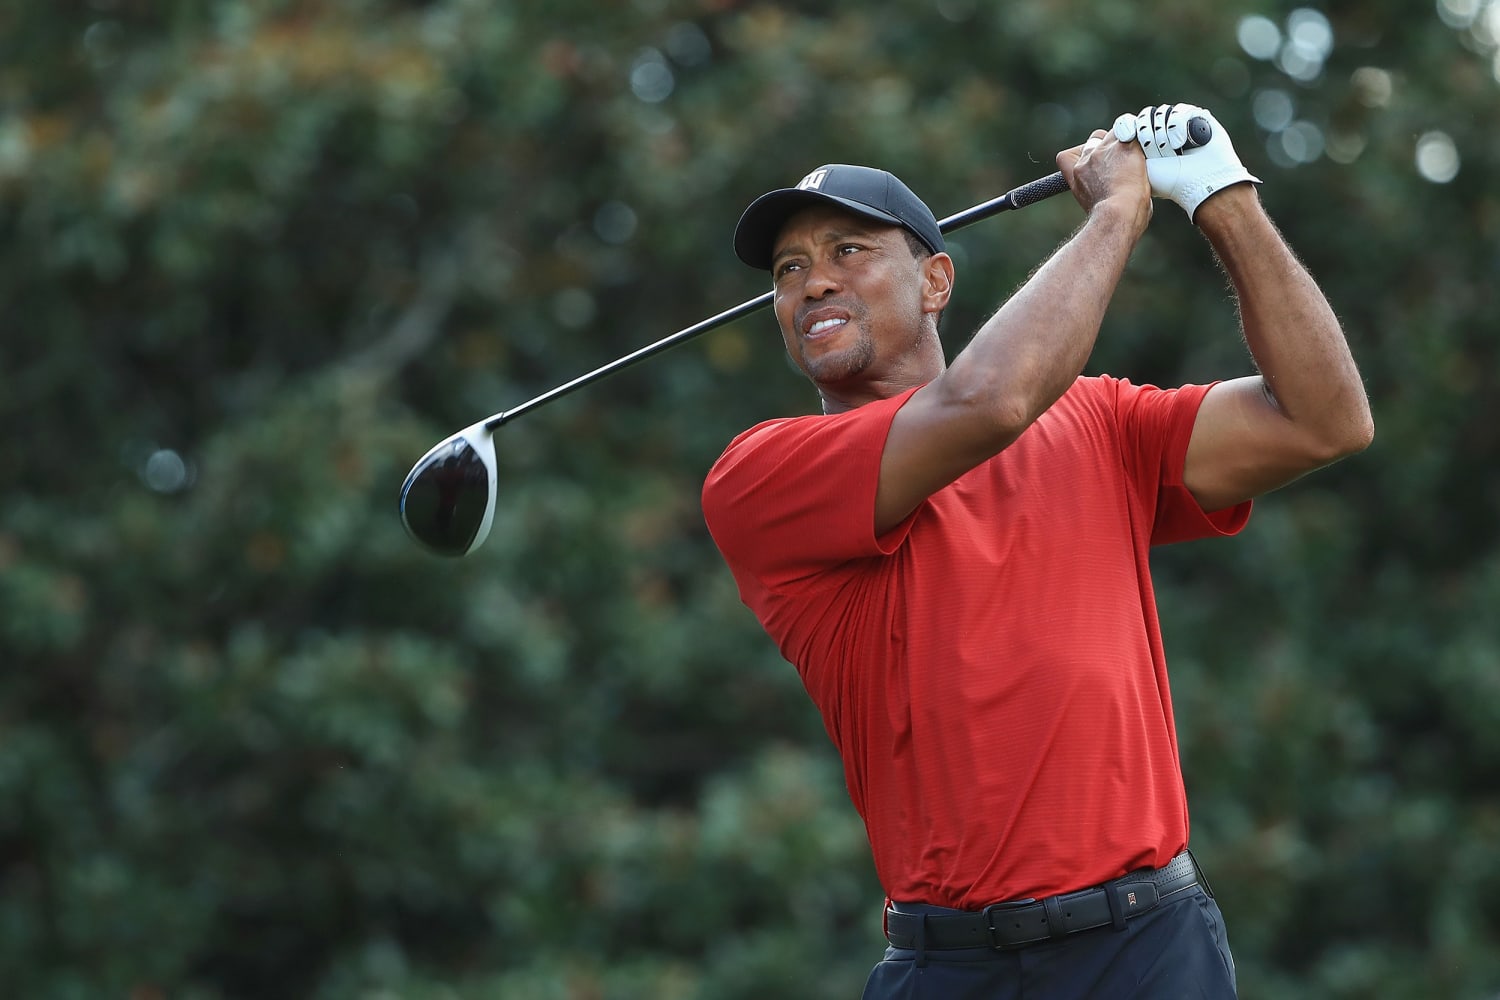 Now that Tiger out of the woods, endorsement deals follow?